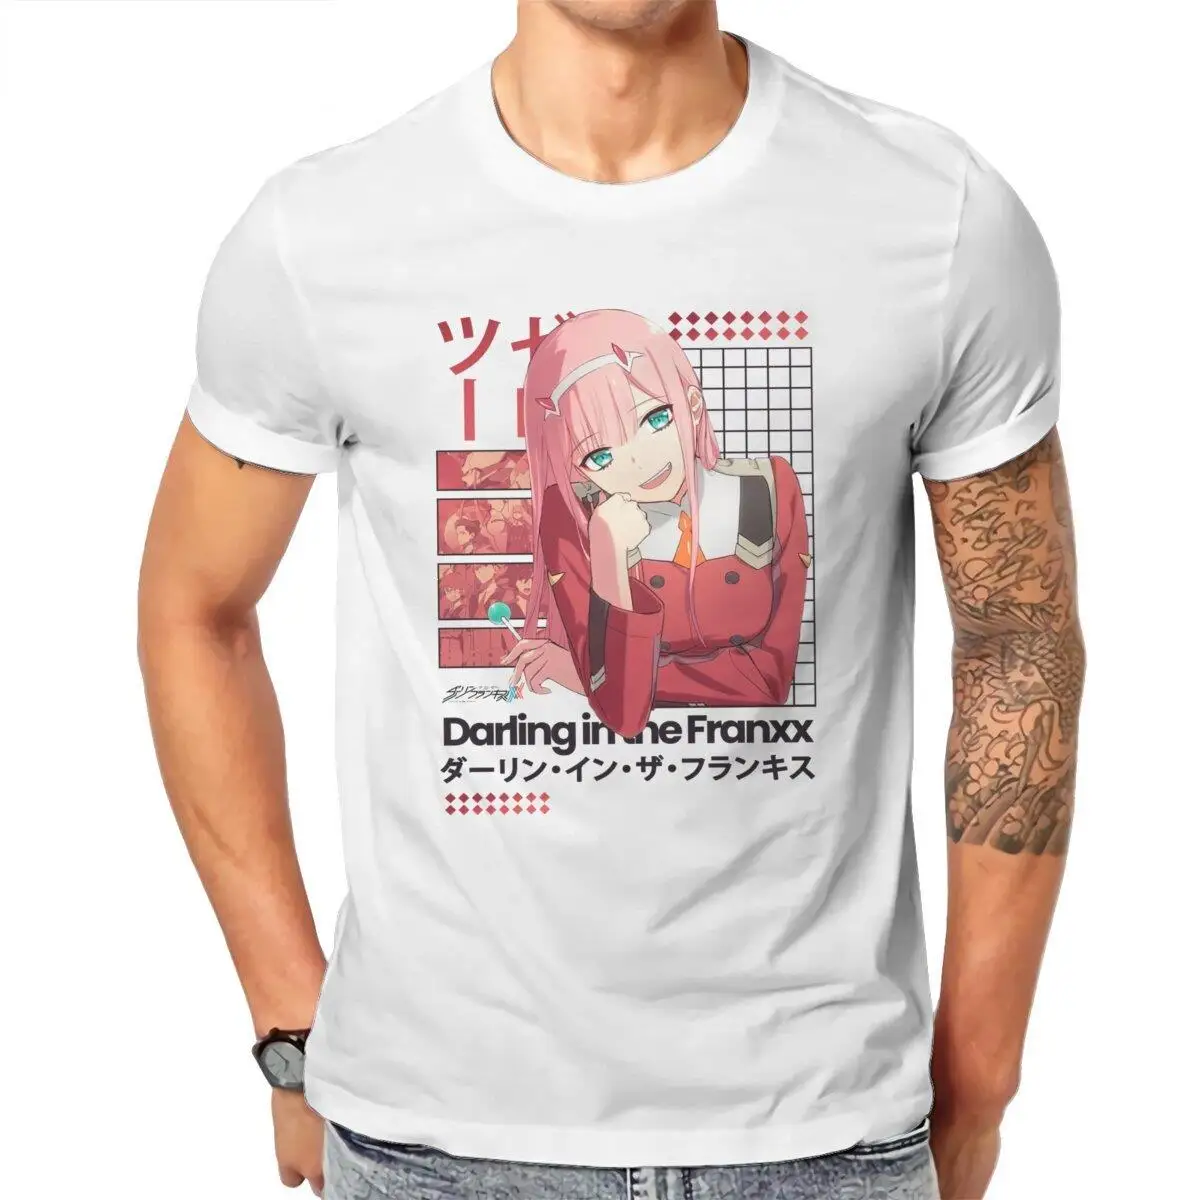 Zero Two 002 Darling in the Franxx  T-Shirt for Men  Casual 100% Cotton Tee Shirt Crewneck Short Sleeve T Shirt Printing Clothes